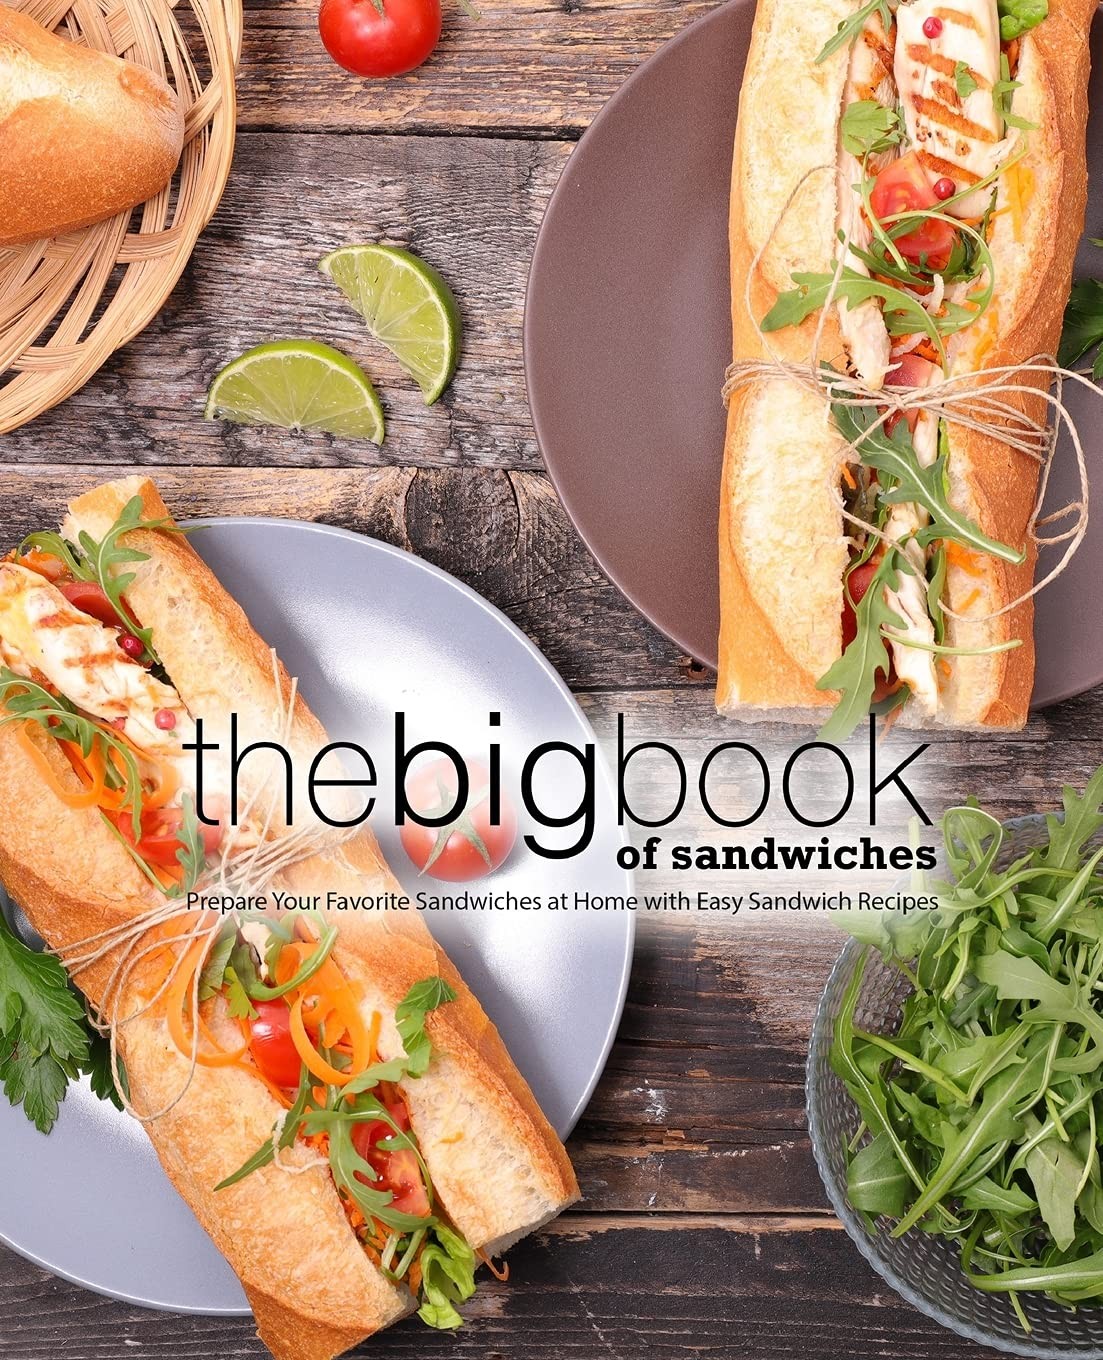 The Big Book of Sandwiches: Prepare Your Favorite Sandwiches at Home With Easy Sandwich Recipes